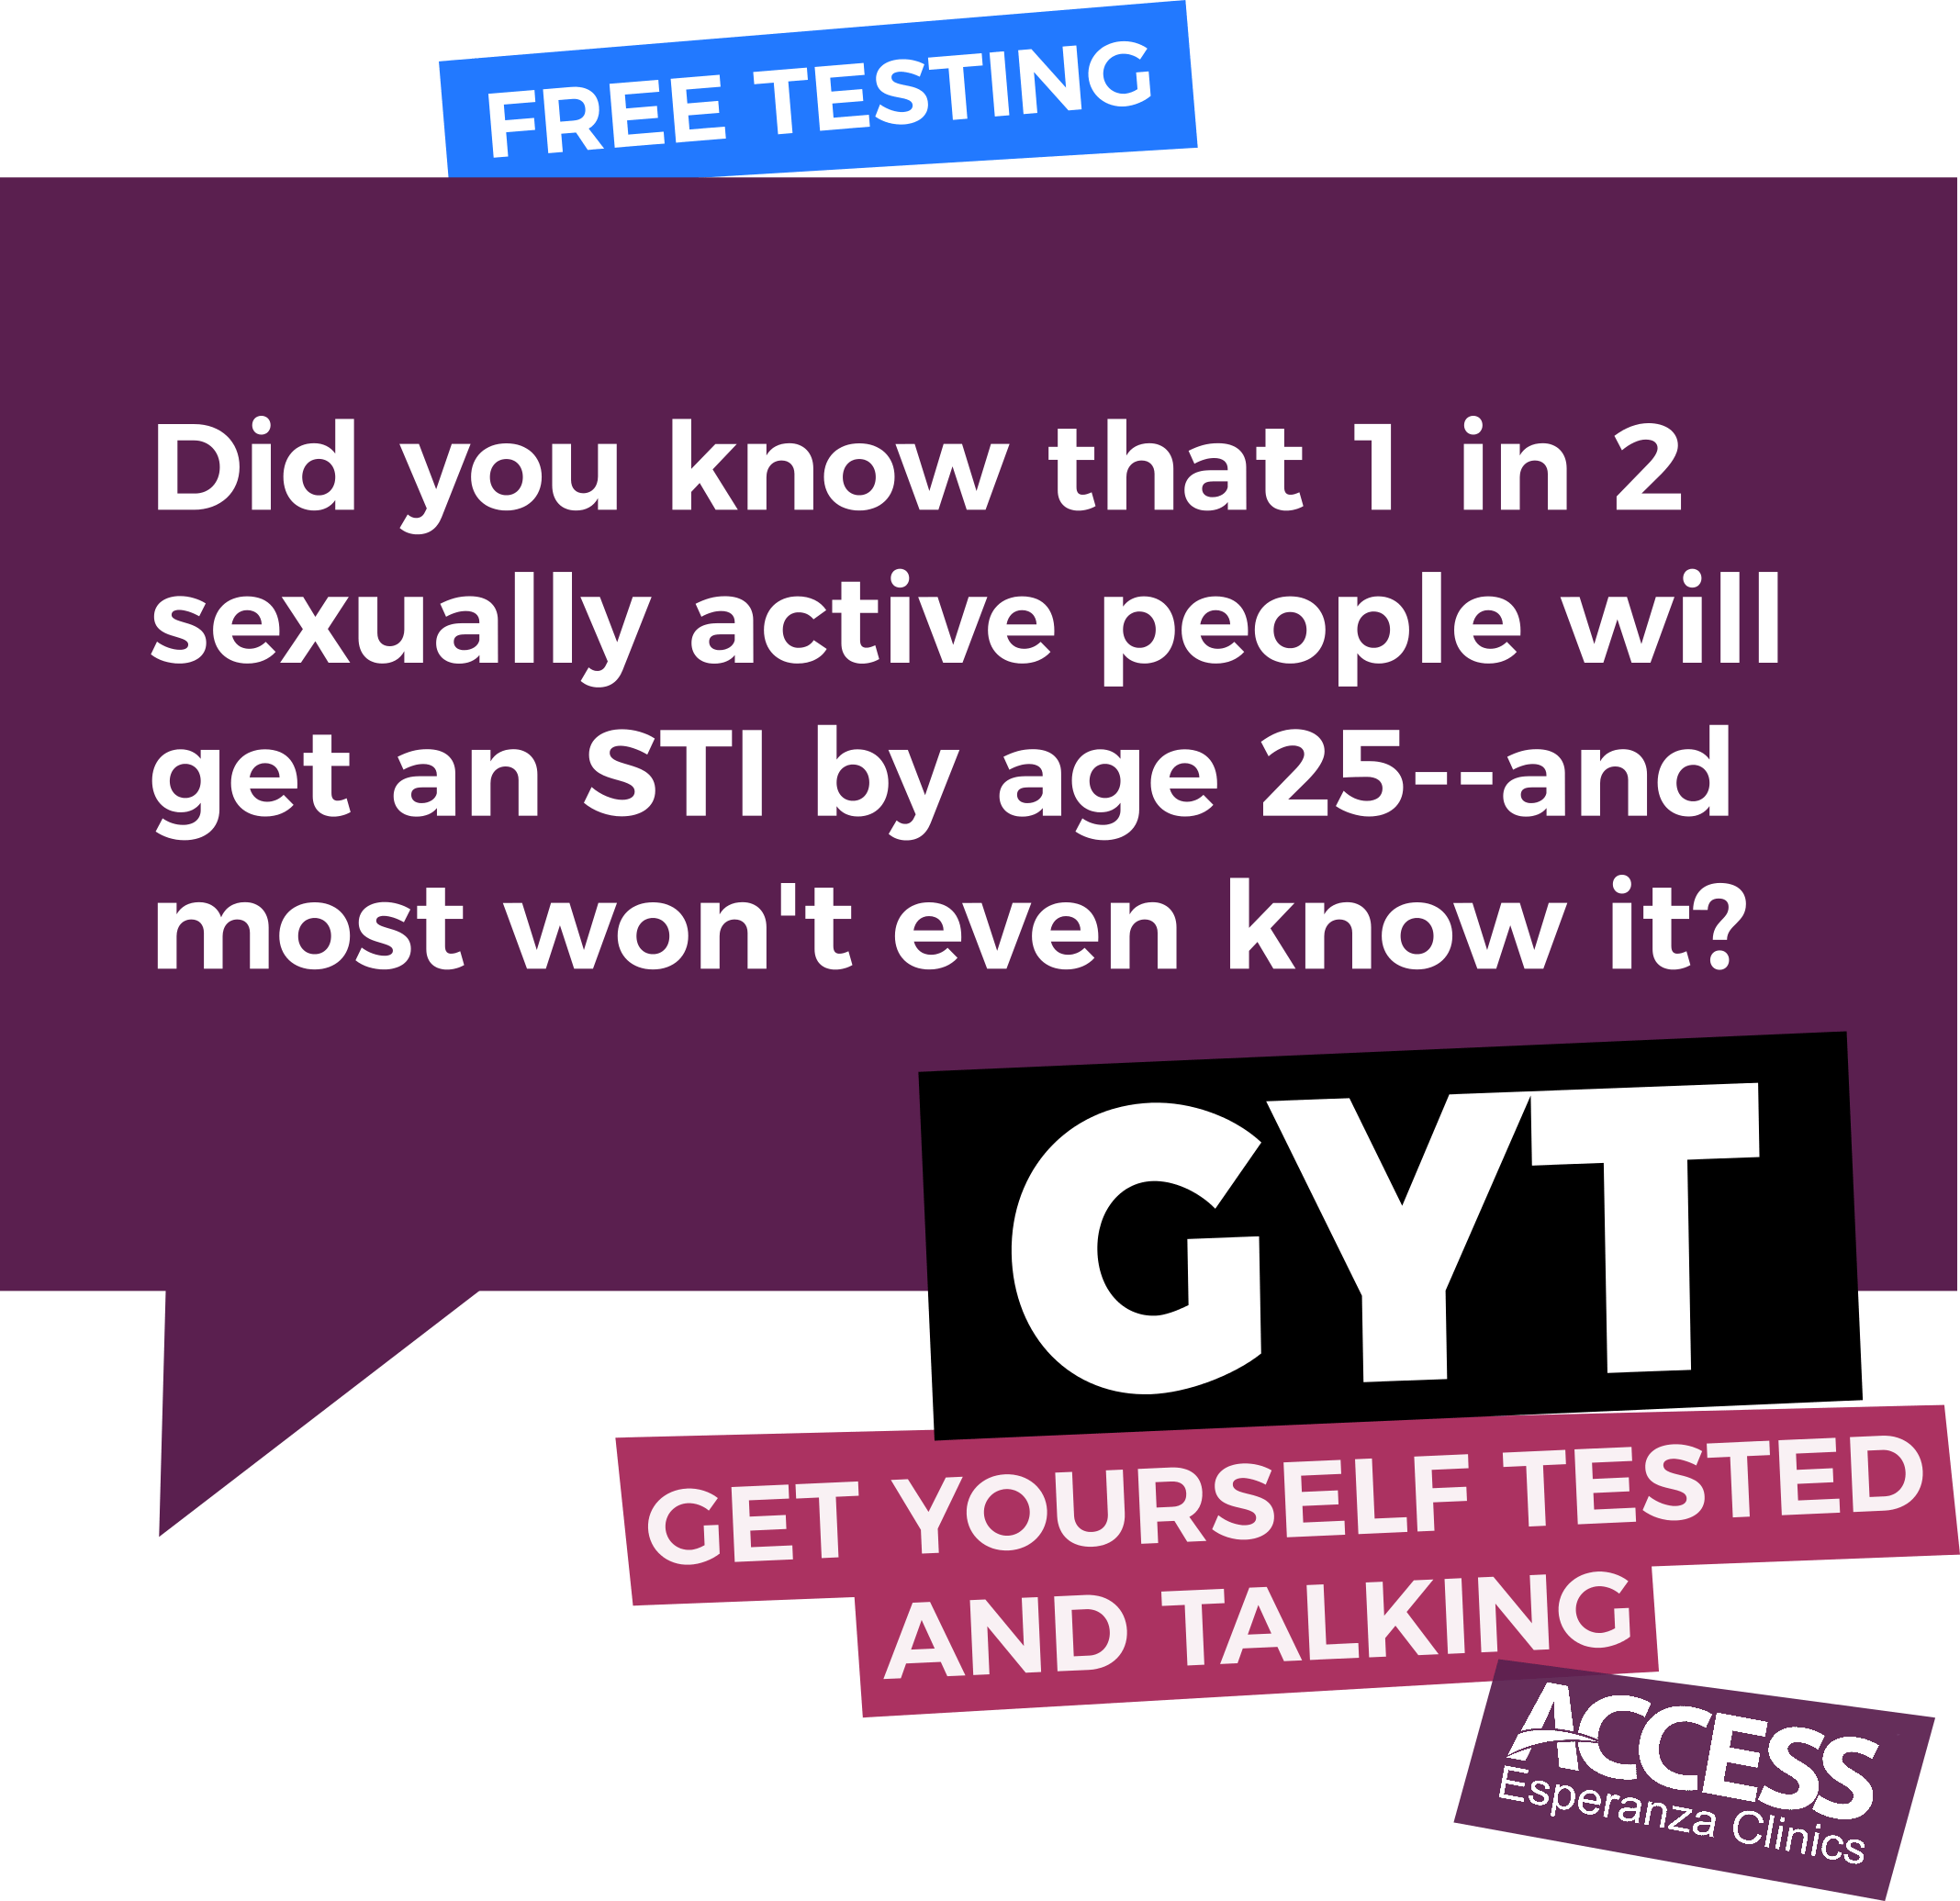 Did you know that 1 in 2 sexually active people will get an STD by age 25--and most won't even know it?